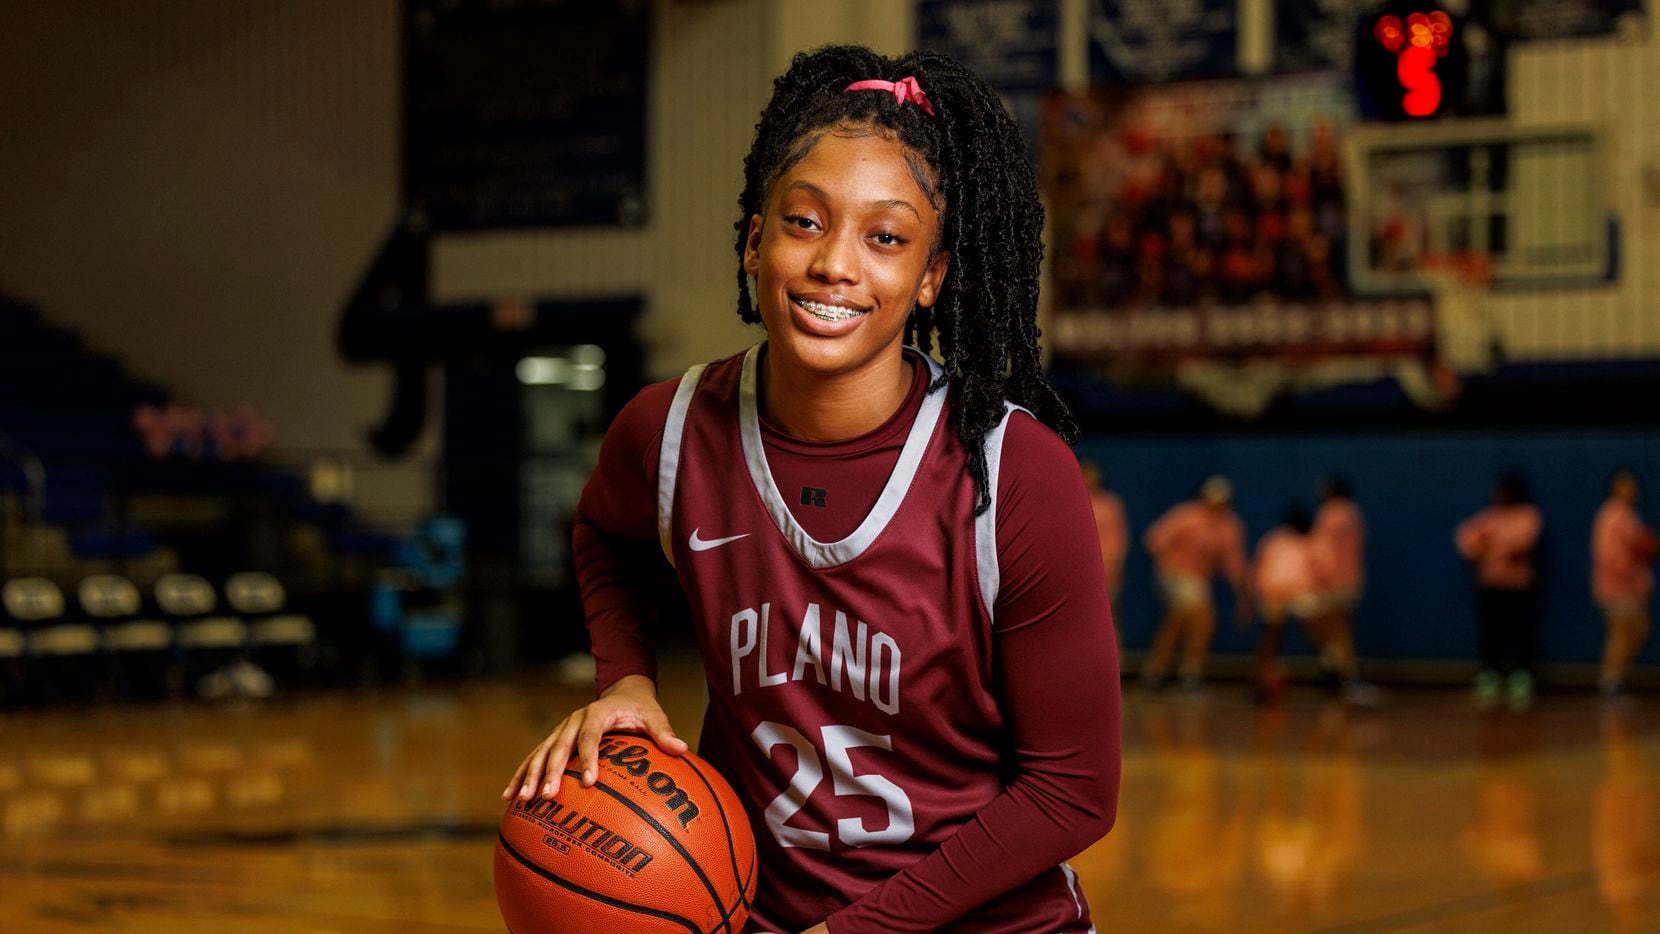 Plano senior Salese Blow (25) pictured before a game at Plano West High School in Plano,...